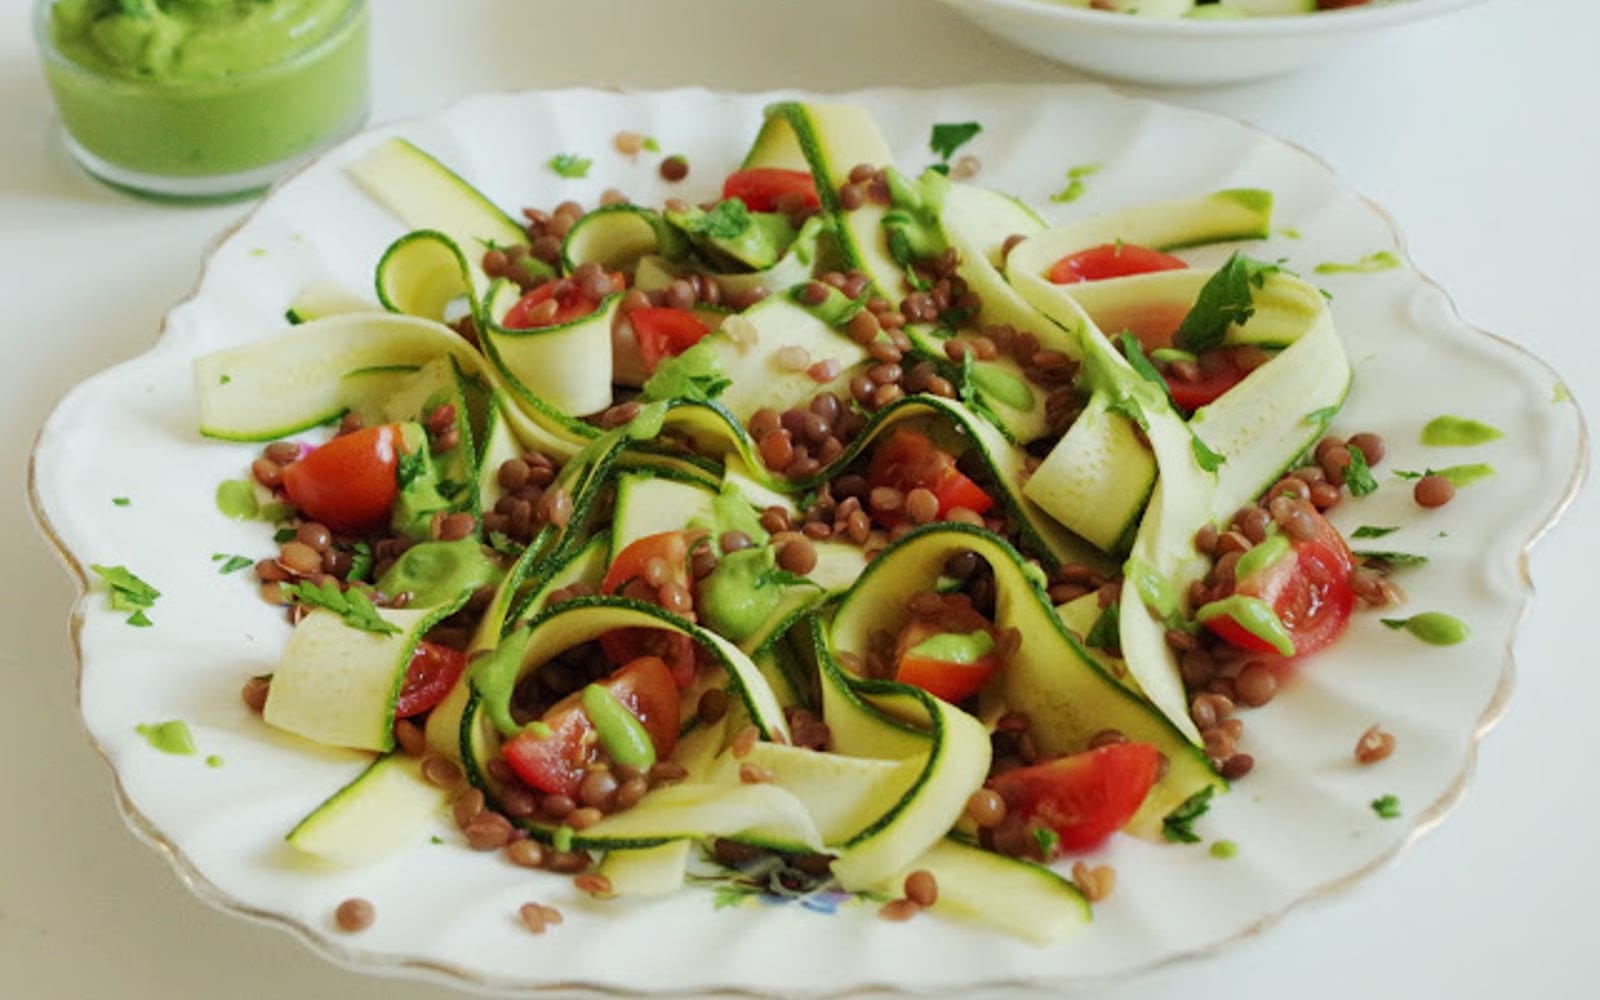 Zucchini Ribbons and Lentils